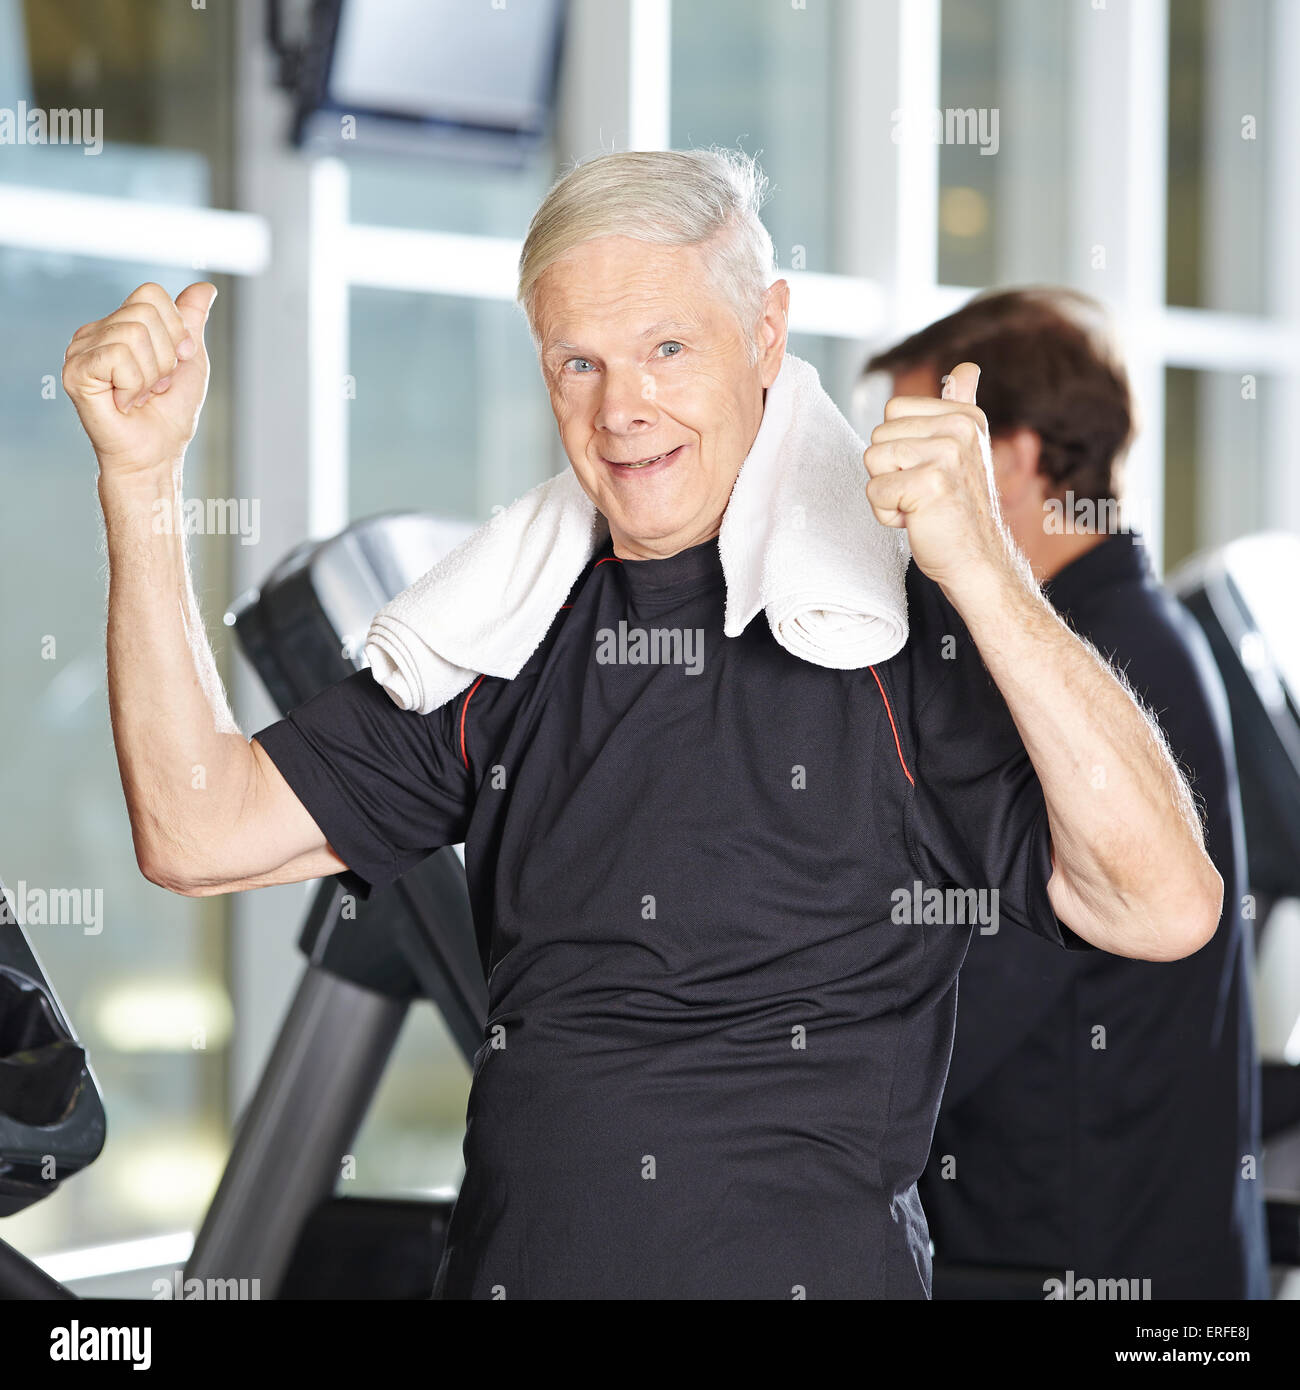 Old man on treadmill in fitness center holding his thumbs up Stock Photo